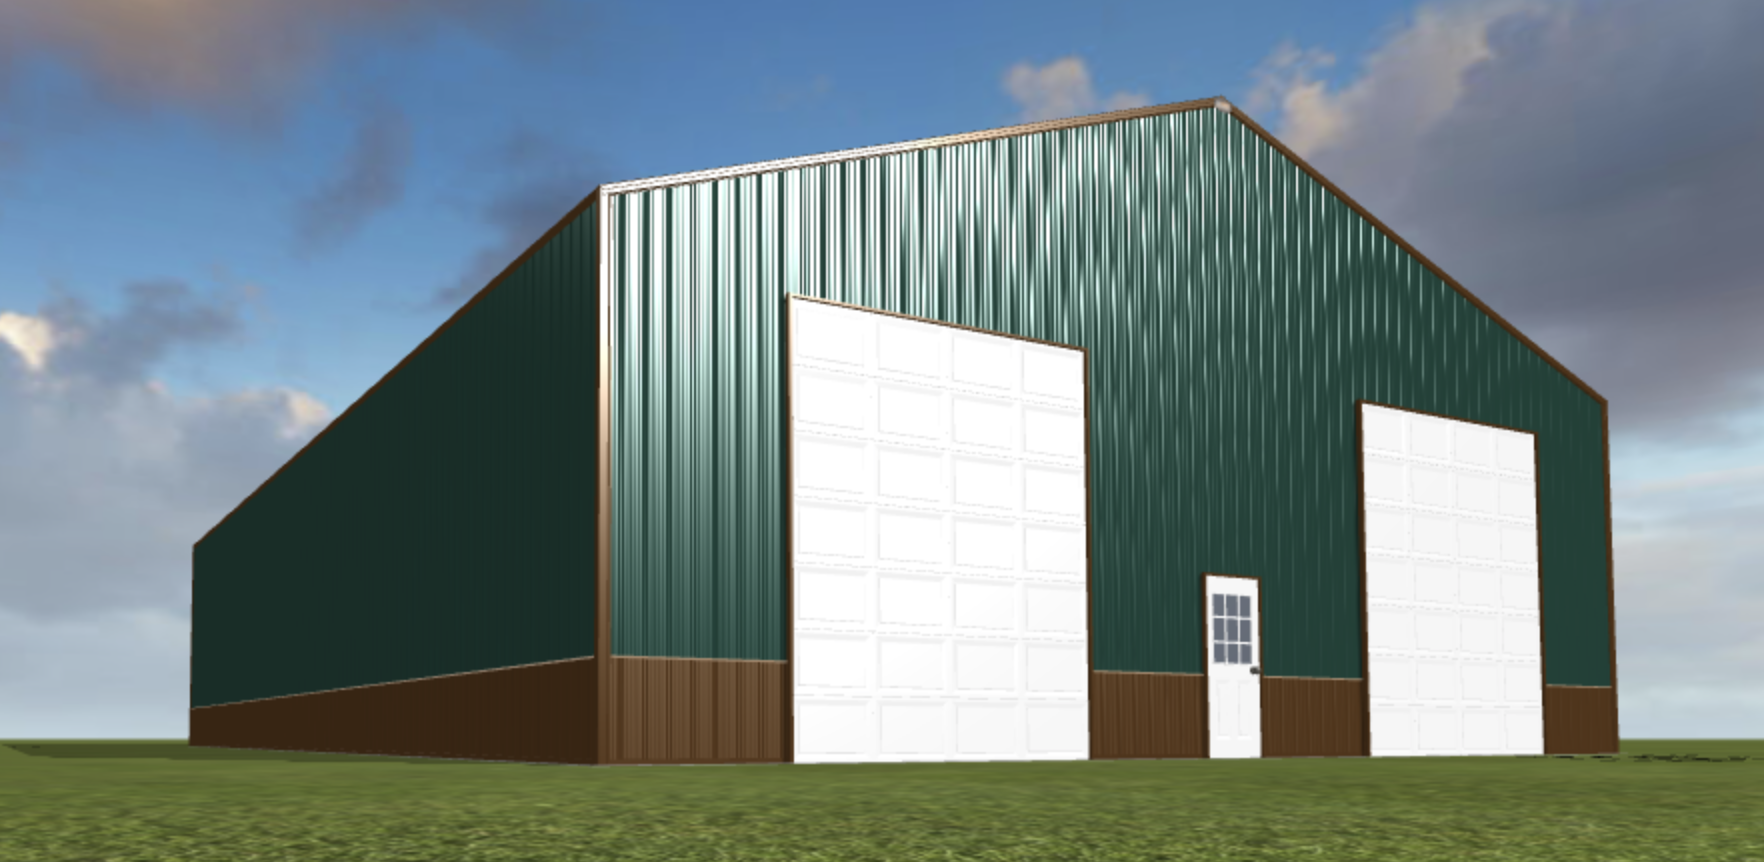 A 3d rendering of a green metal building.